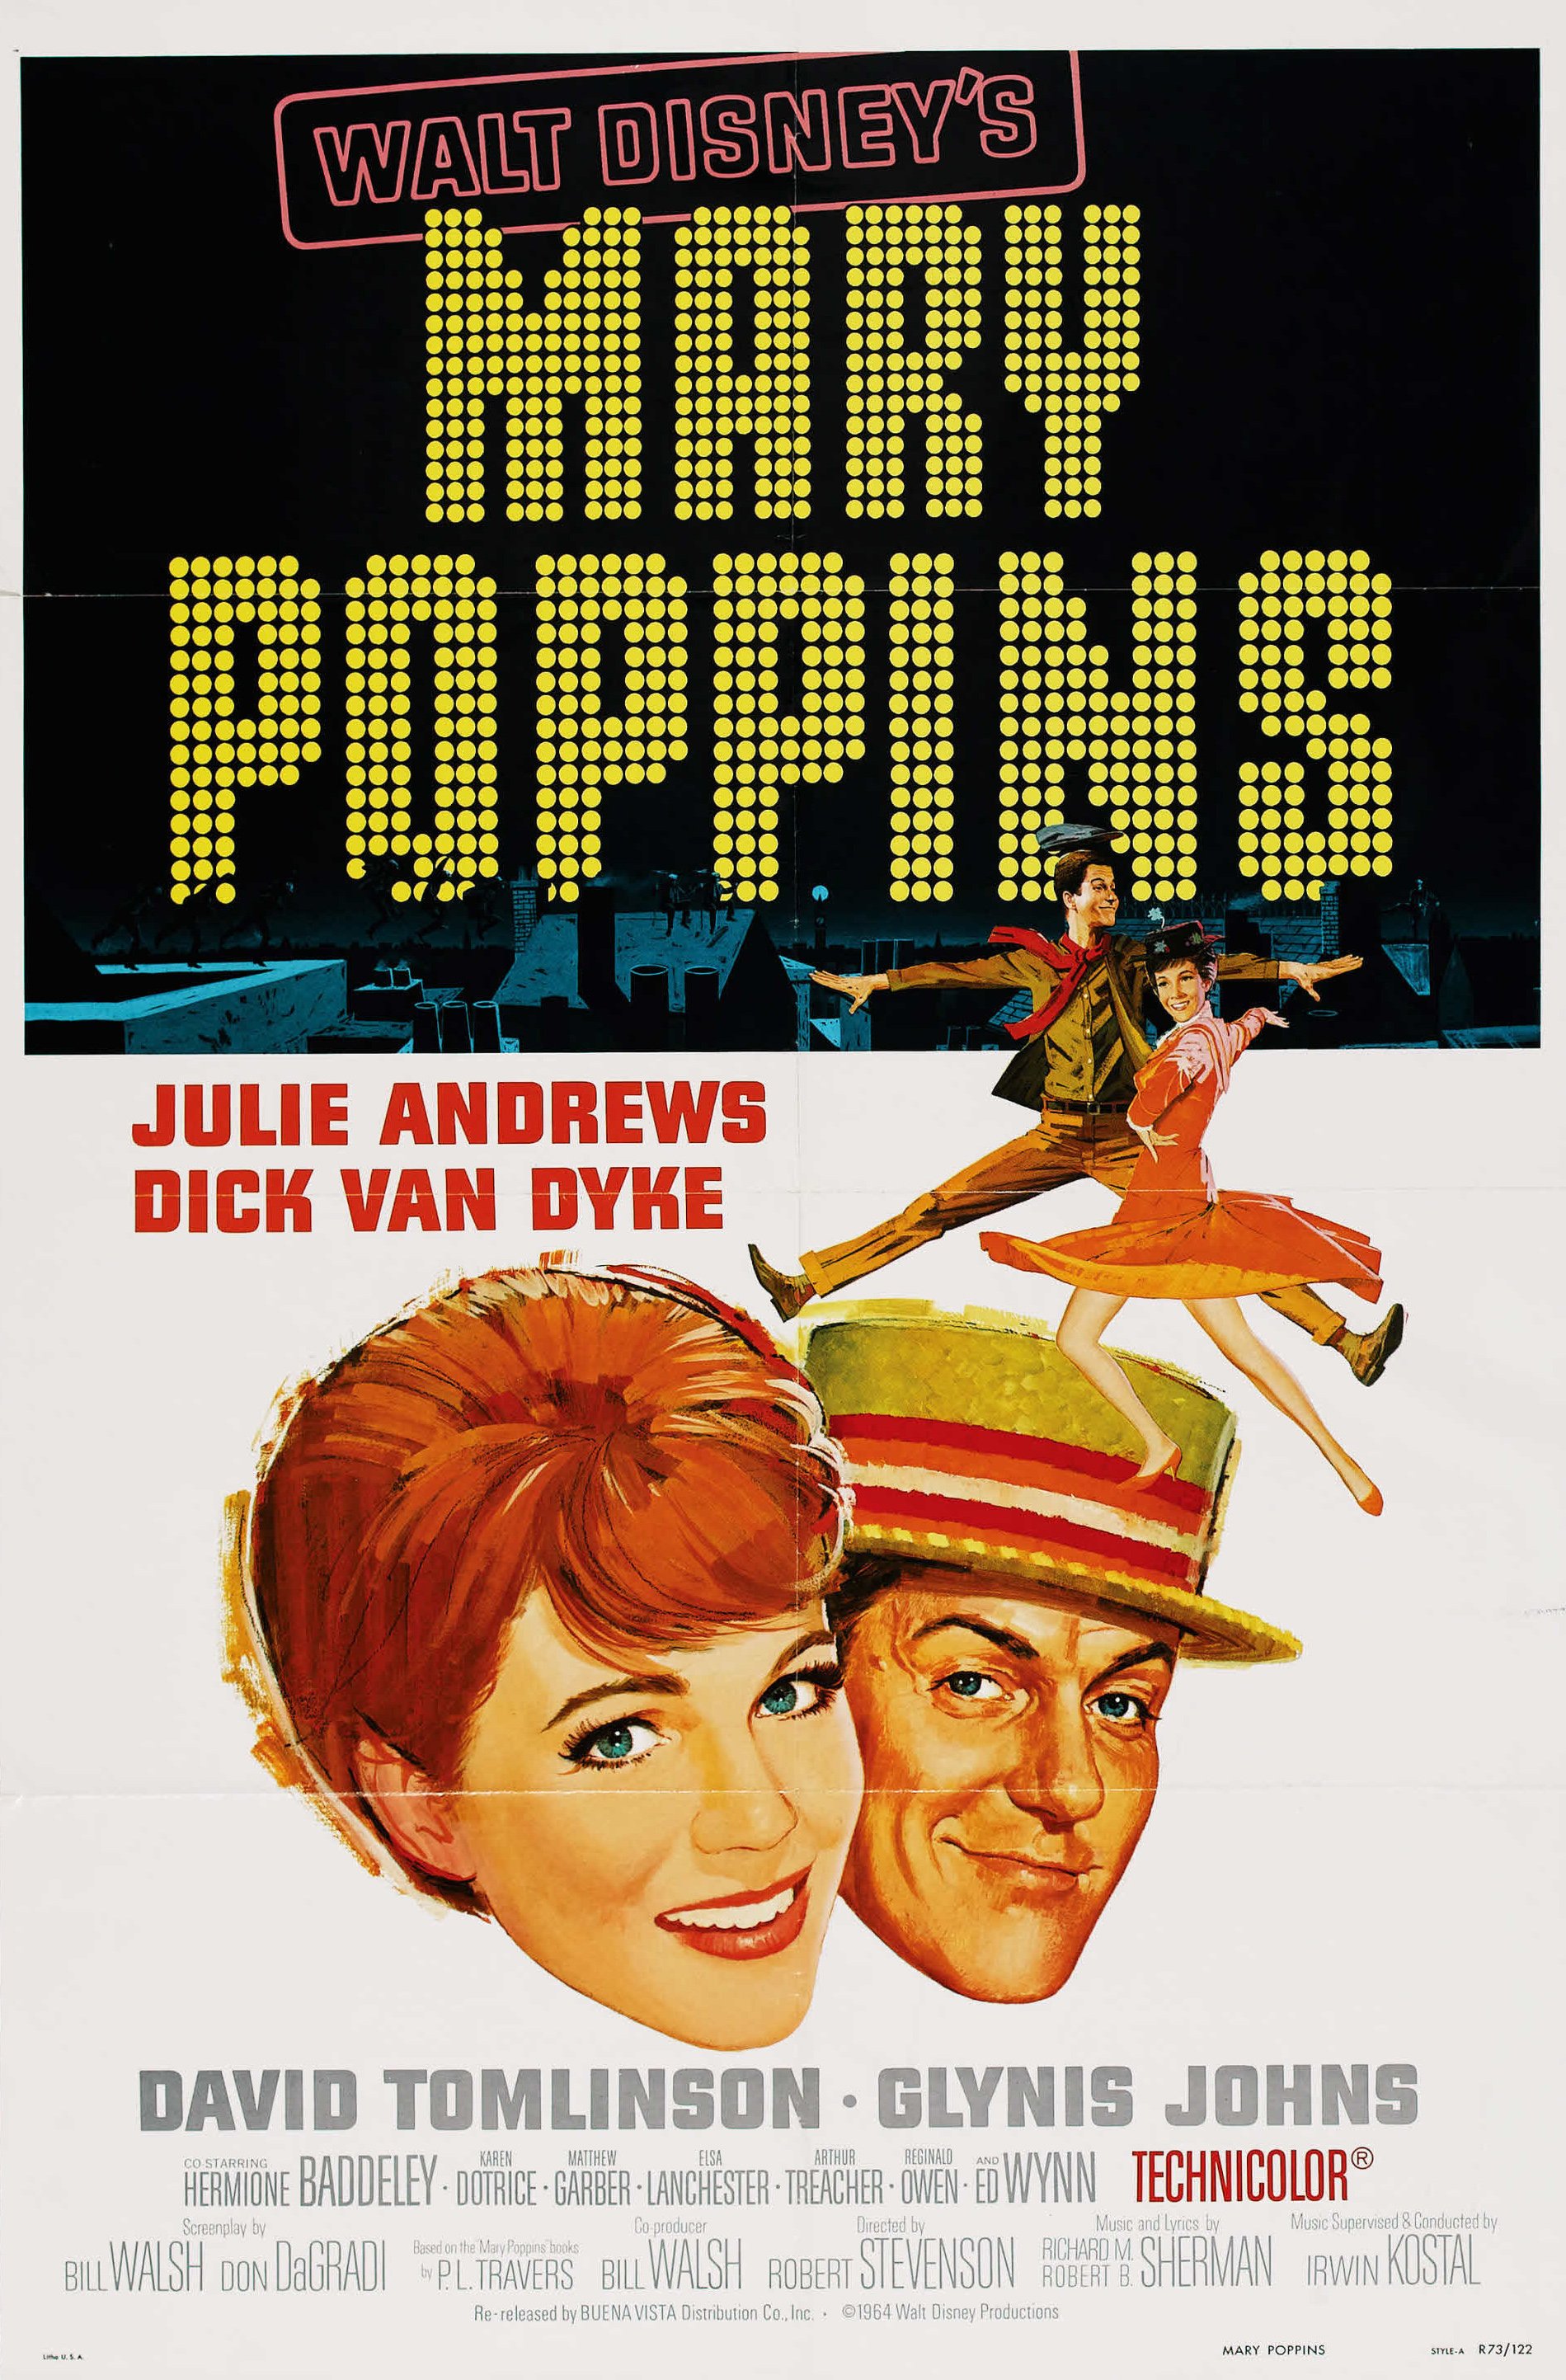 Poster of the movie Mary Poppins